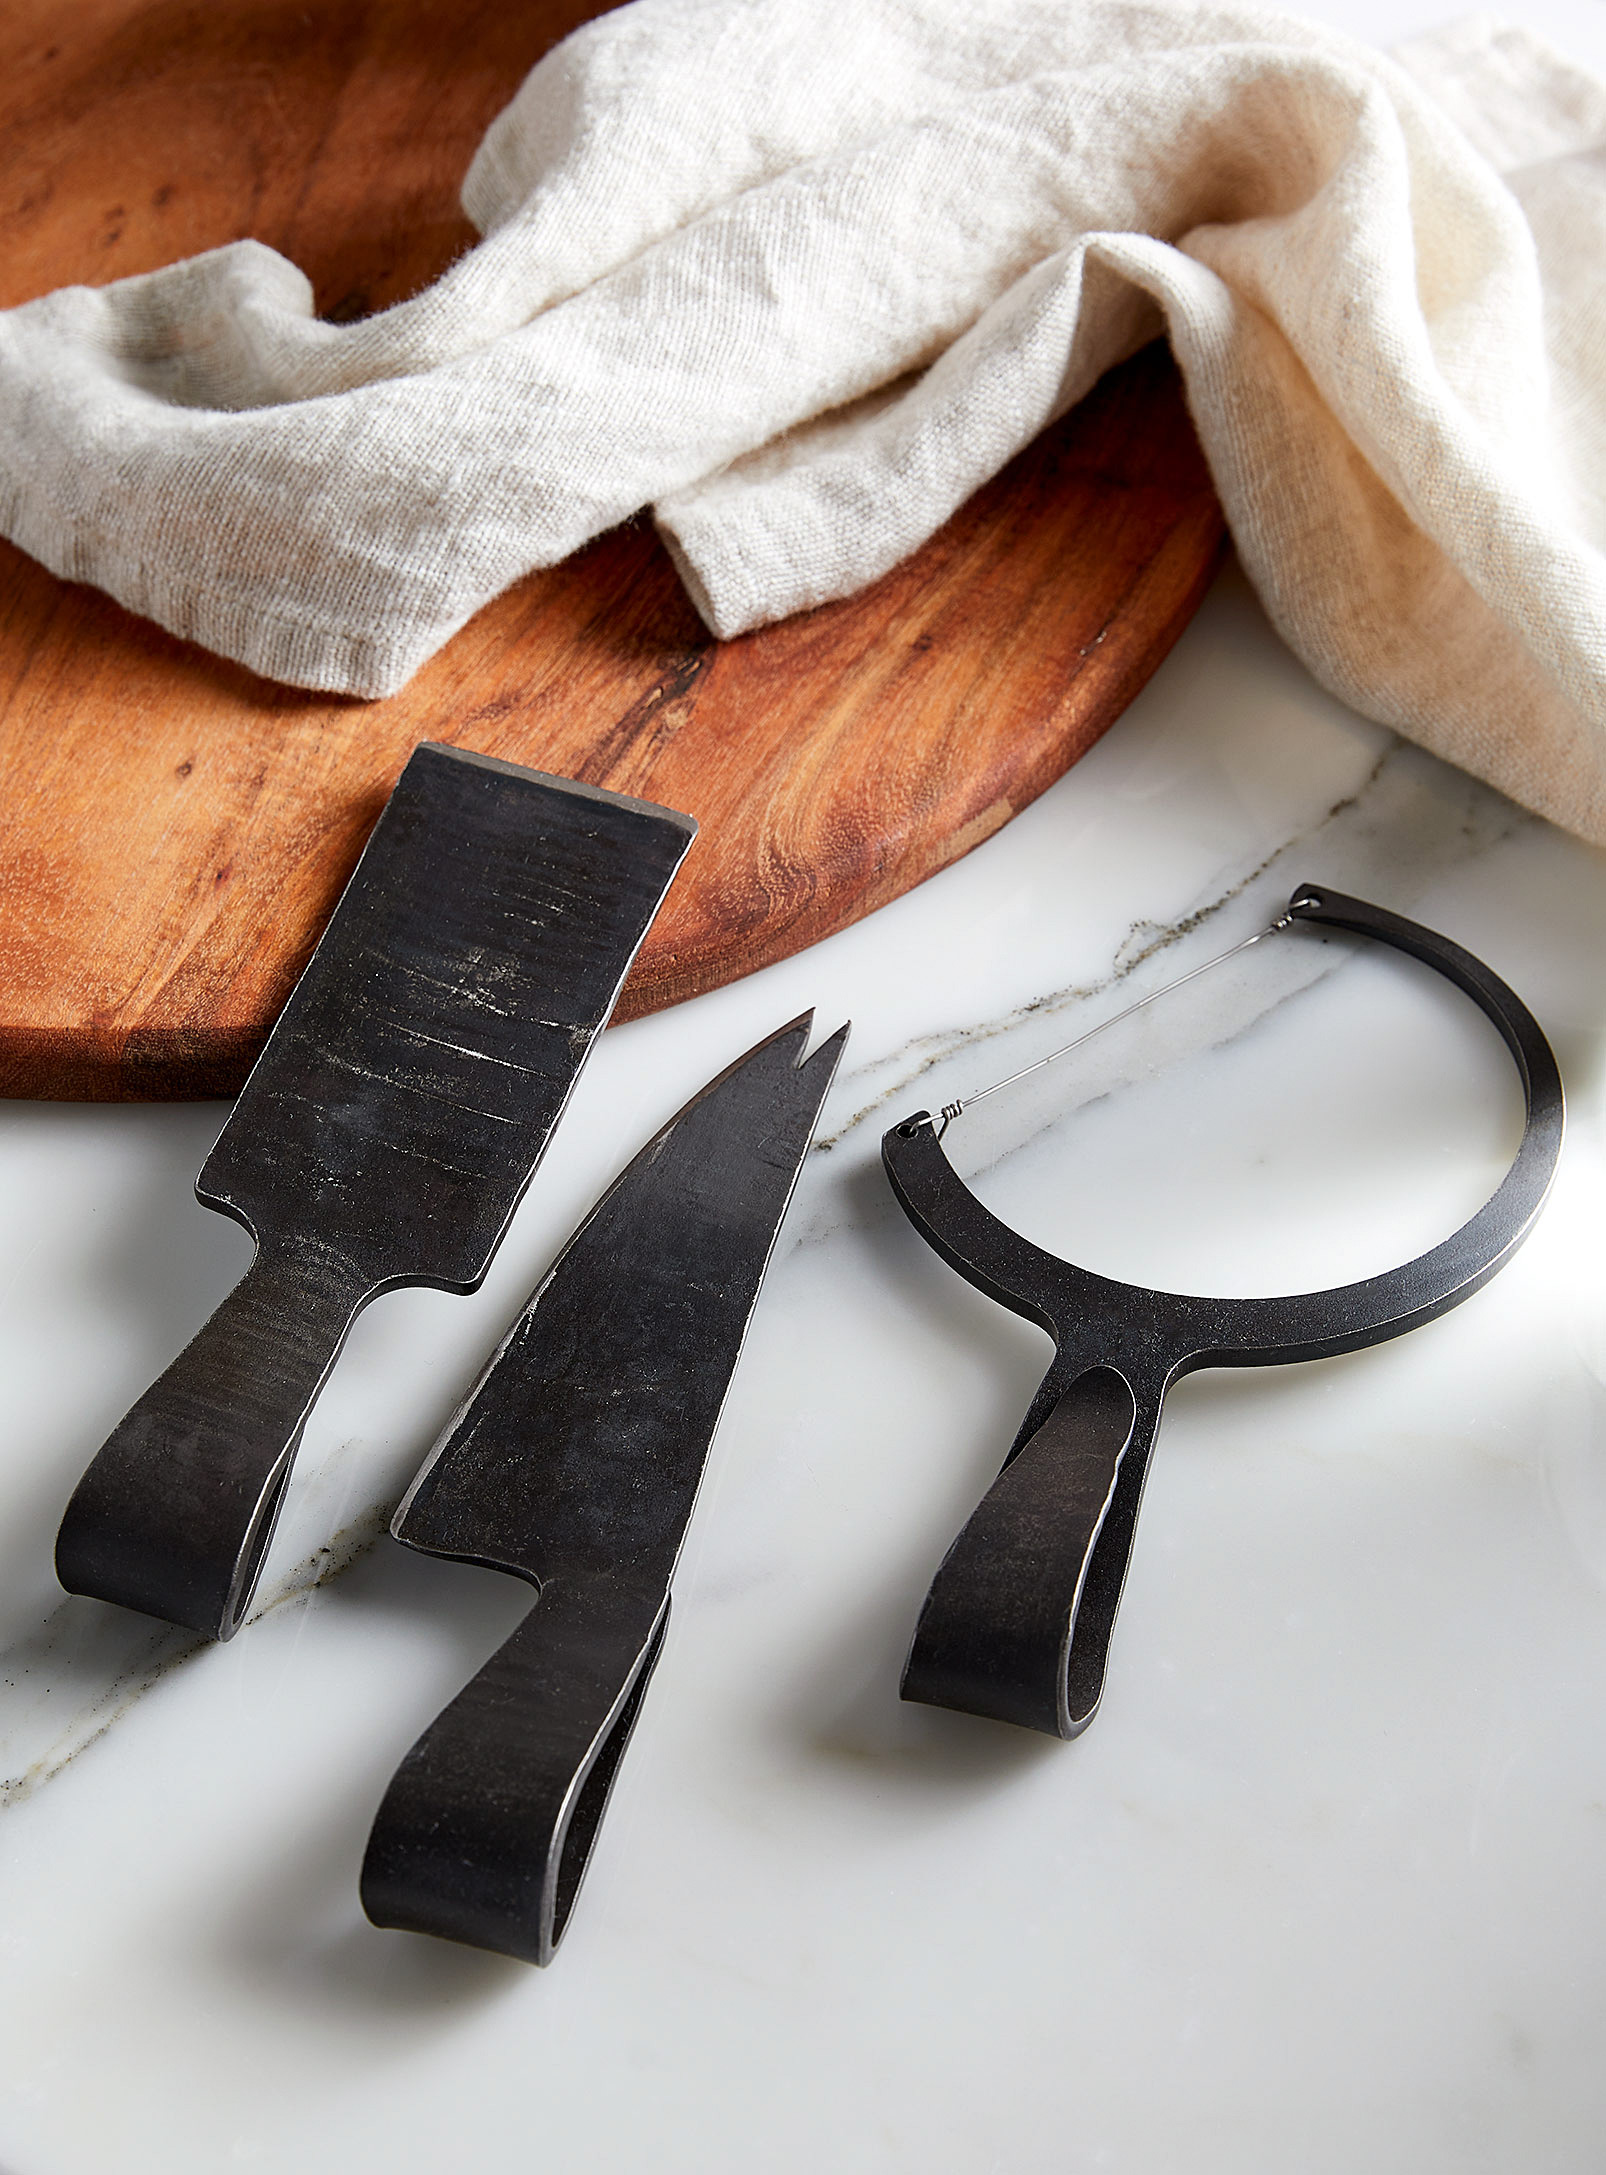 Cloverdale Forge - Trio of forged cheese knives